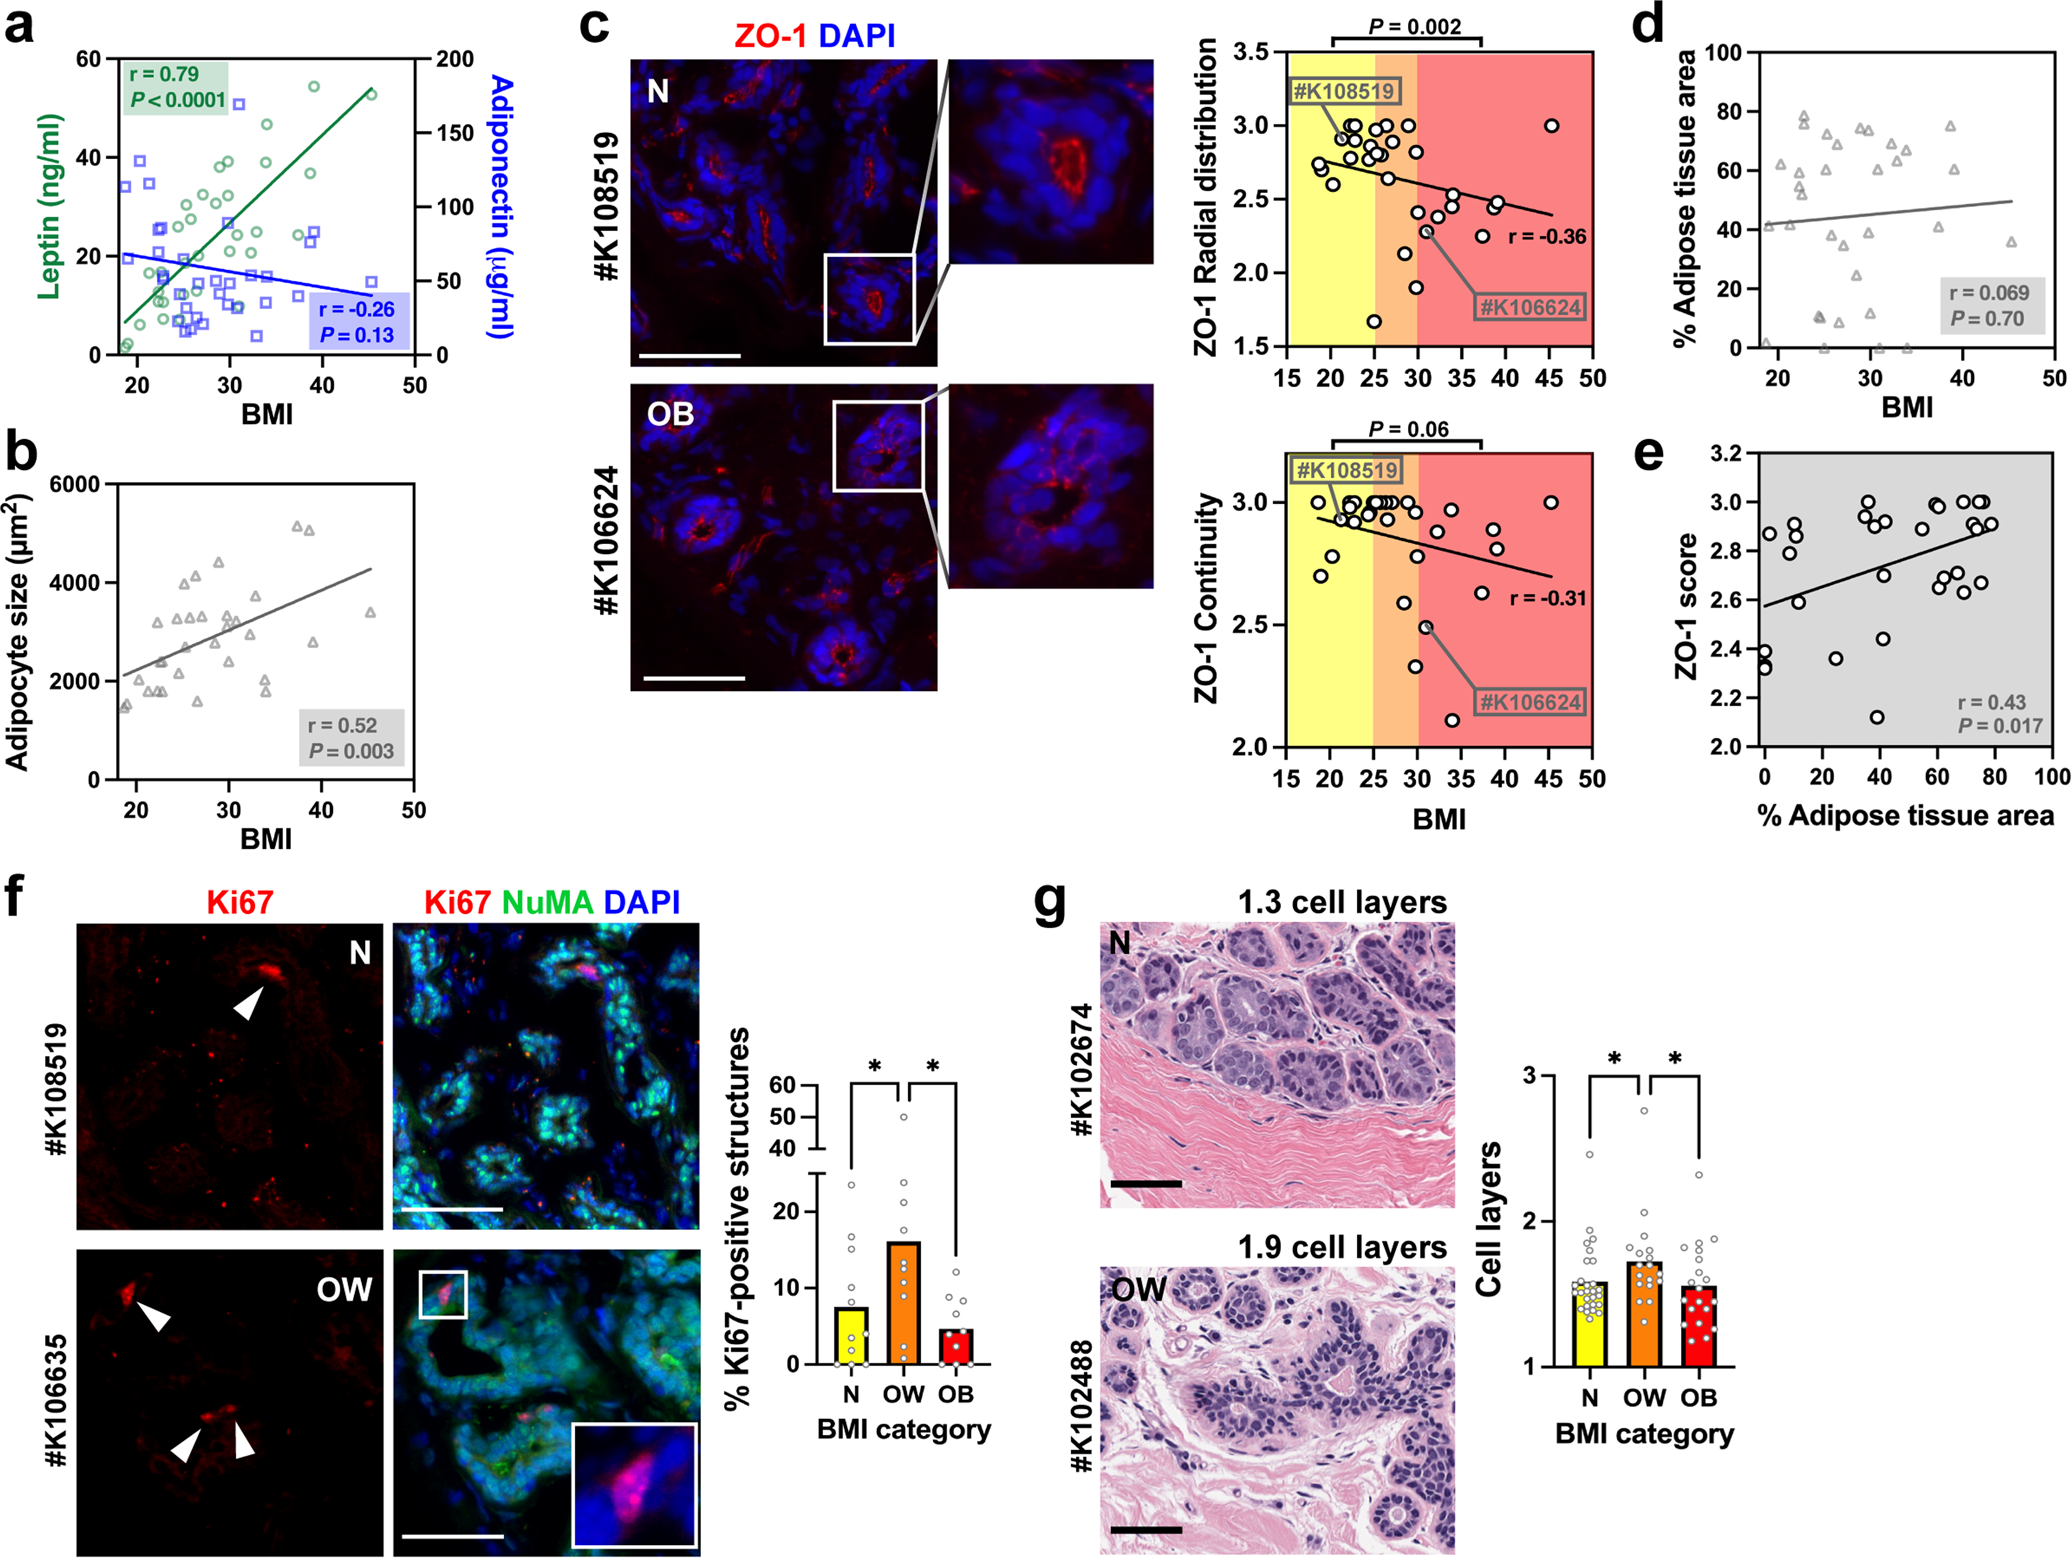 Breast cancer prevention by short-term inhibition of TGFβ